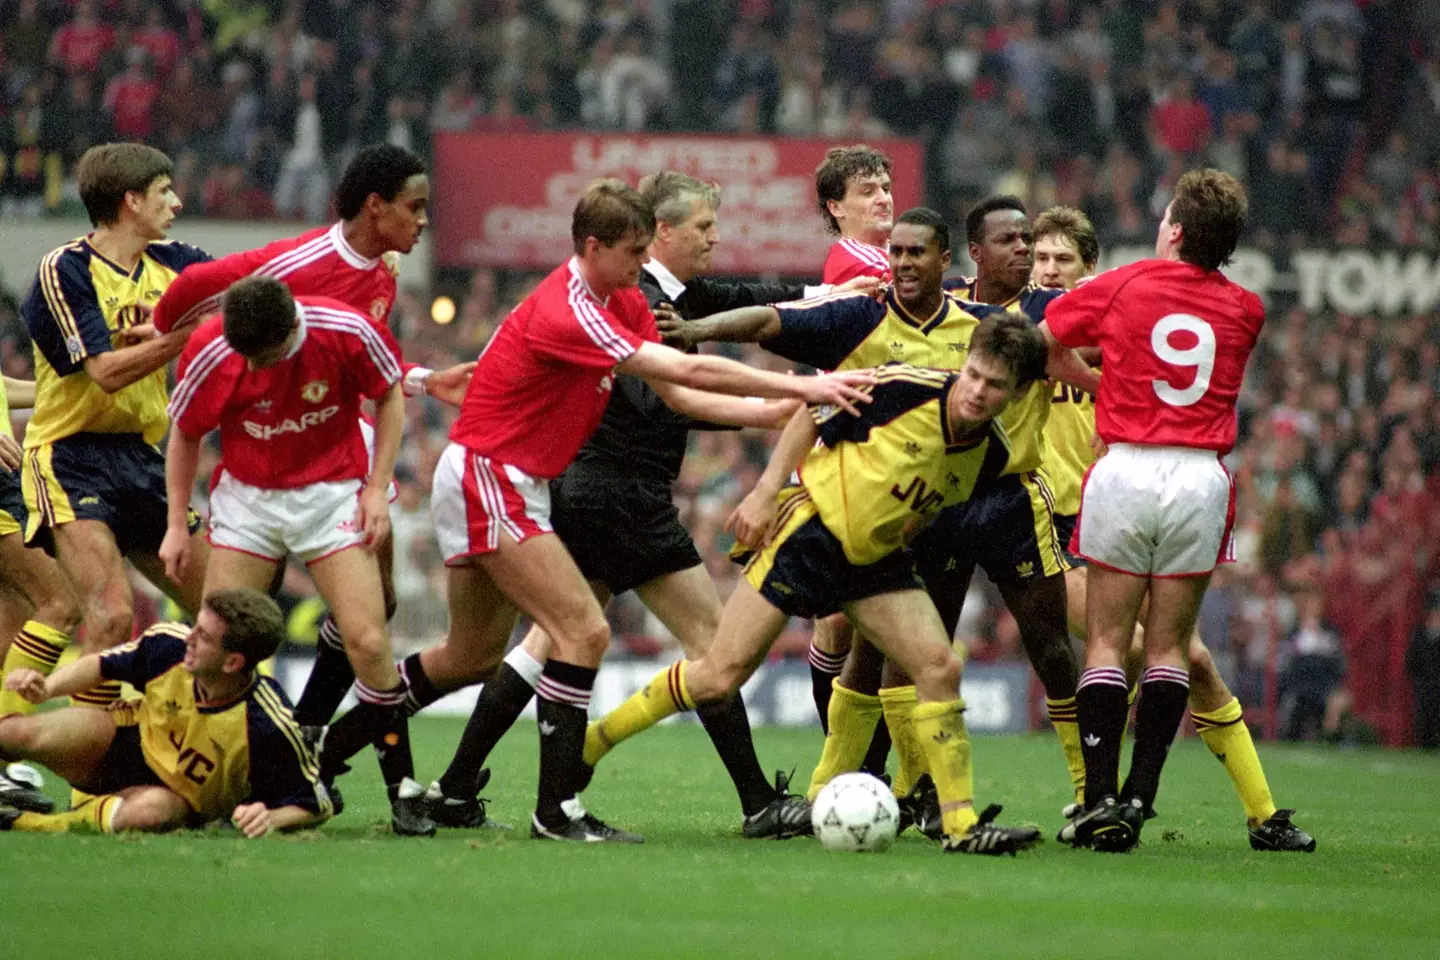 A fight between Arsenal and United led to points deductions in 1990. Image: PA Images